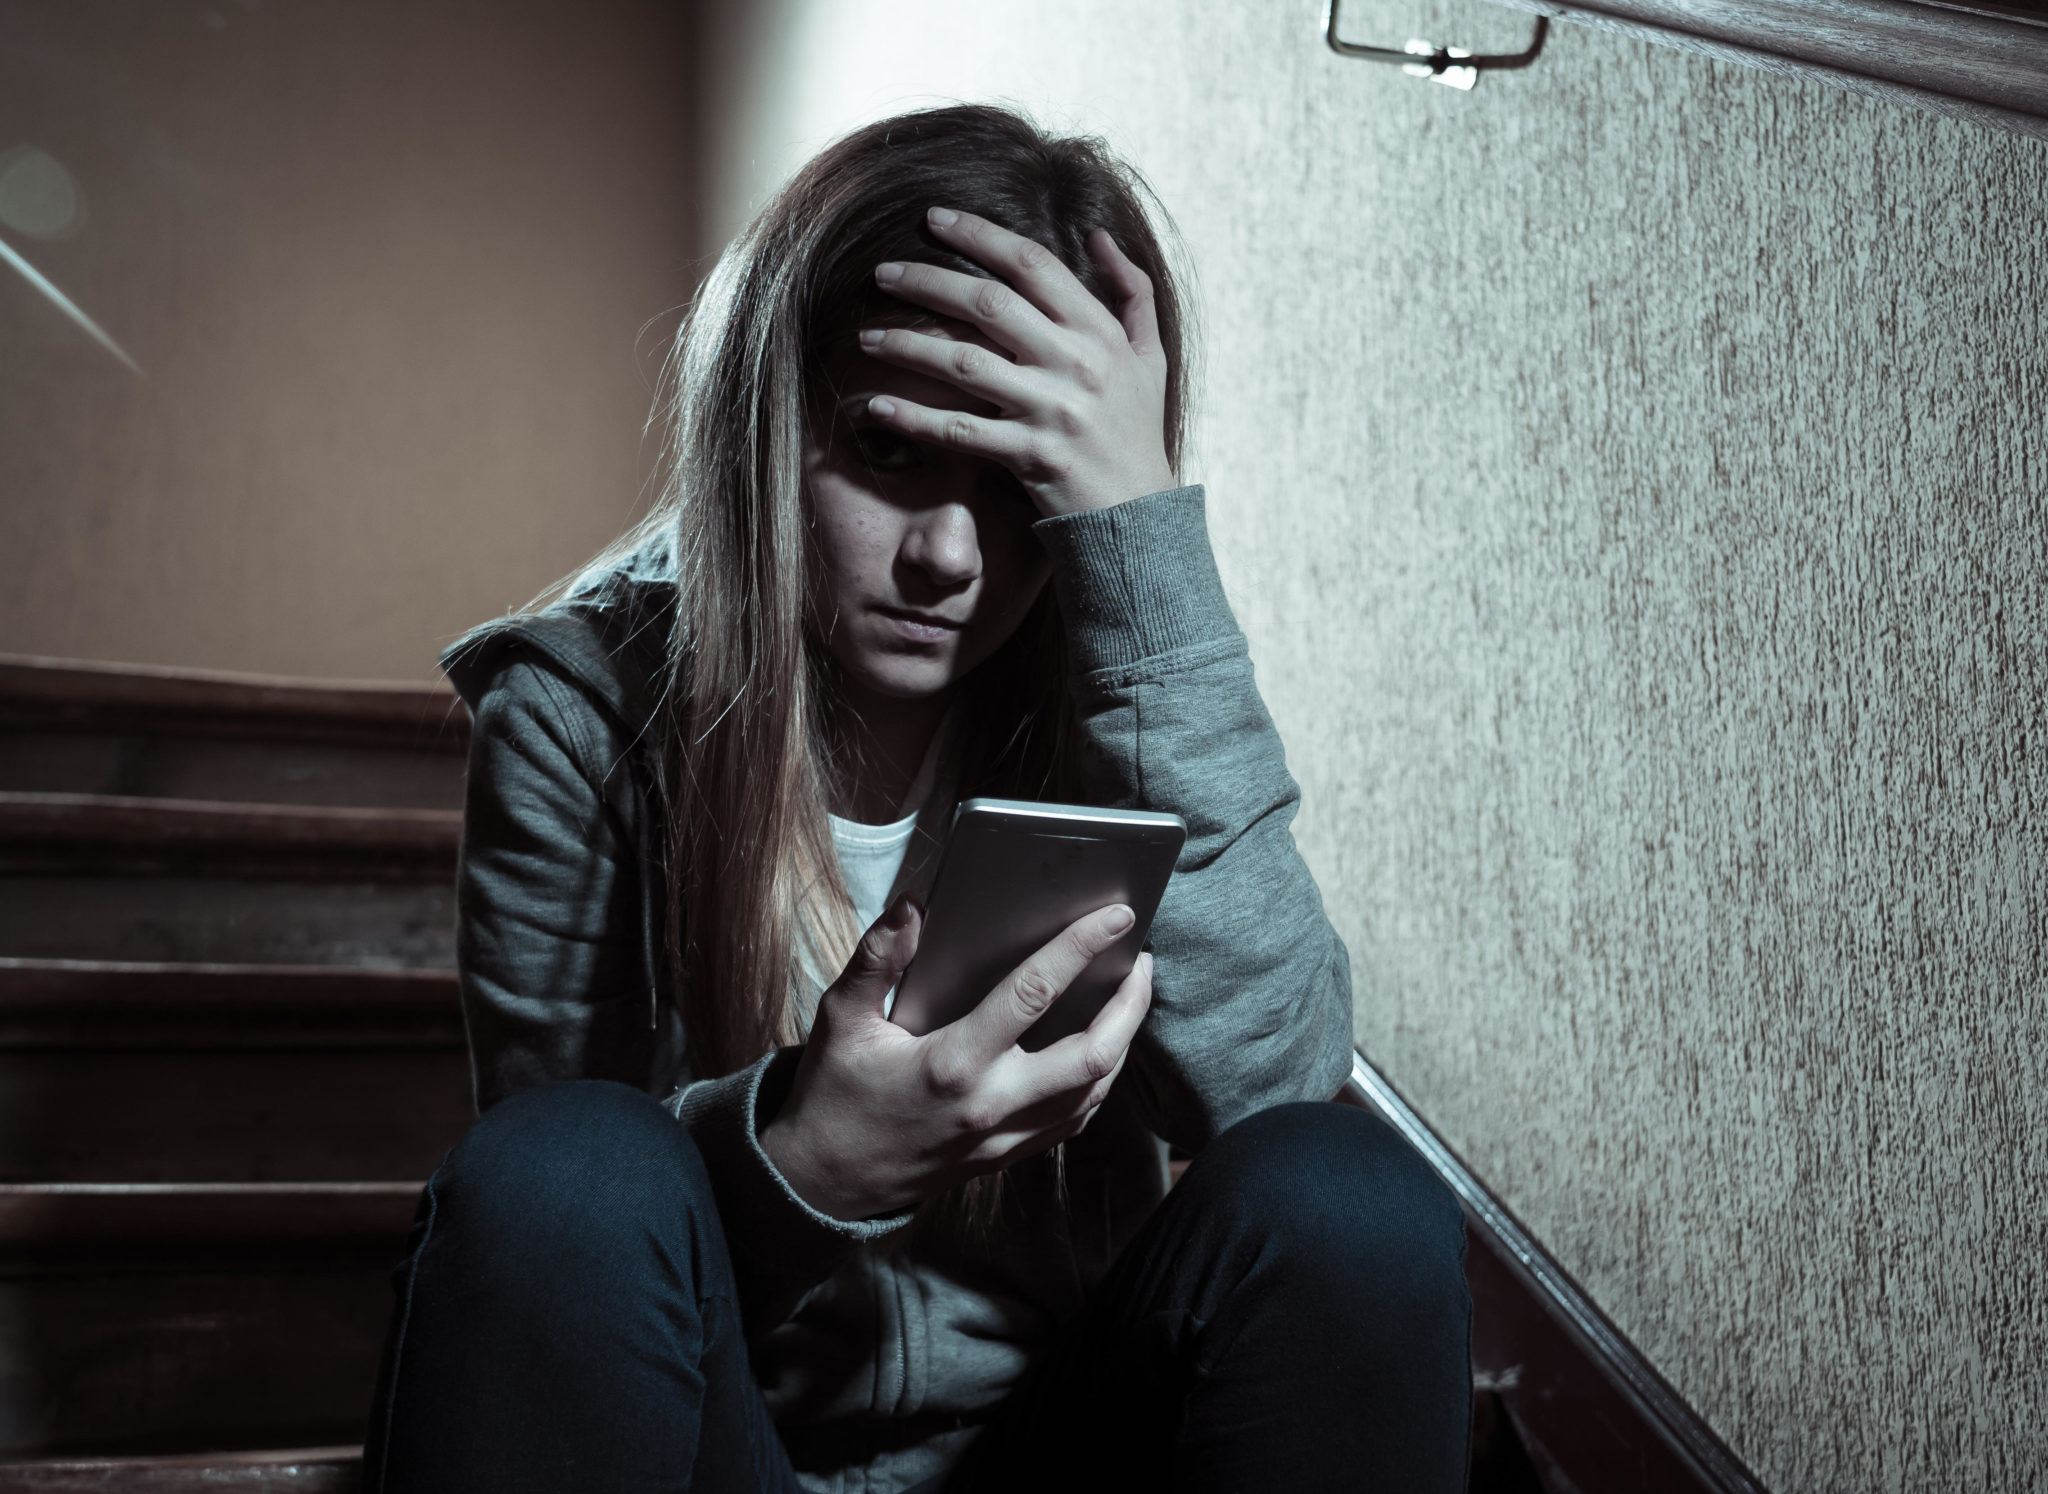 Teenager girl victim of online stalker suffering from cyberbullying abuse feeling lonely and hopeless sitting on stairs with dark light, 20-03-2019. Image: Samuel wordley / Alamy